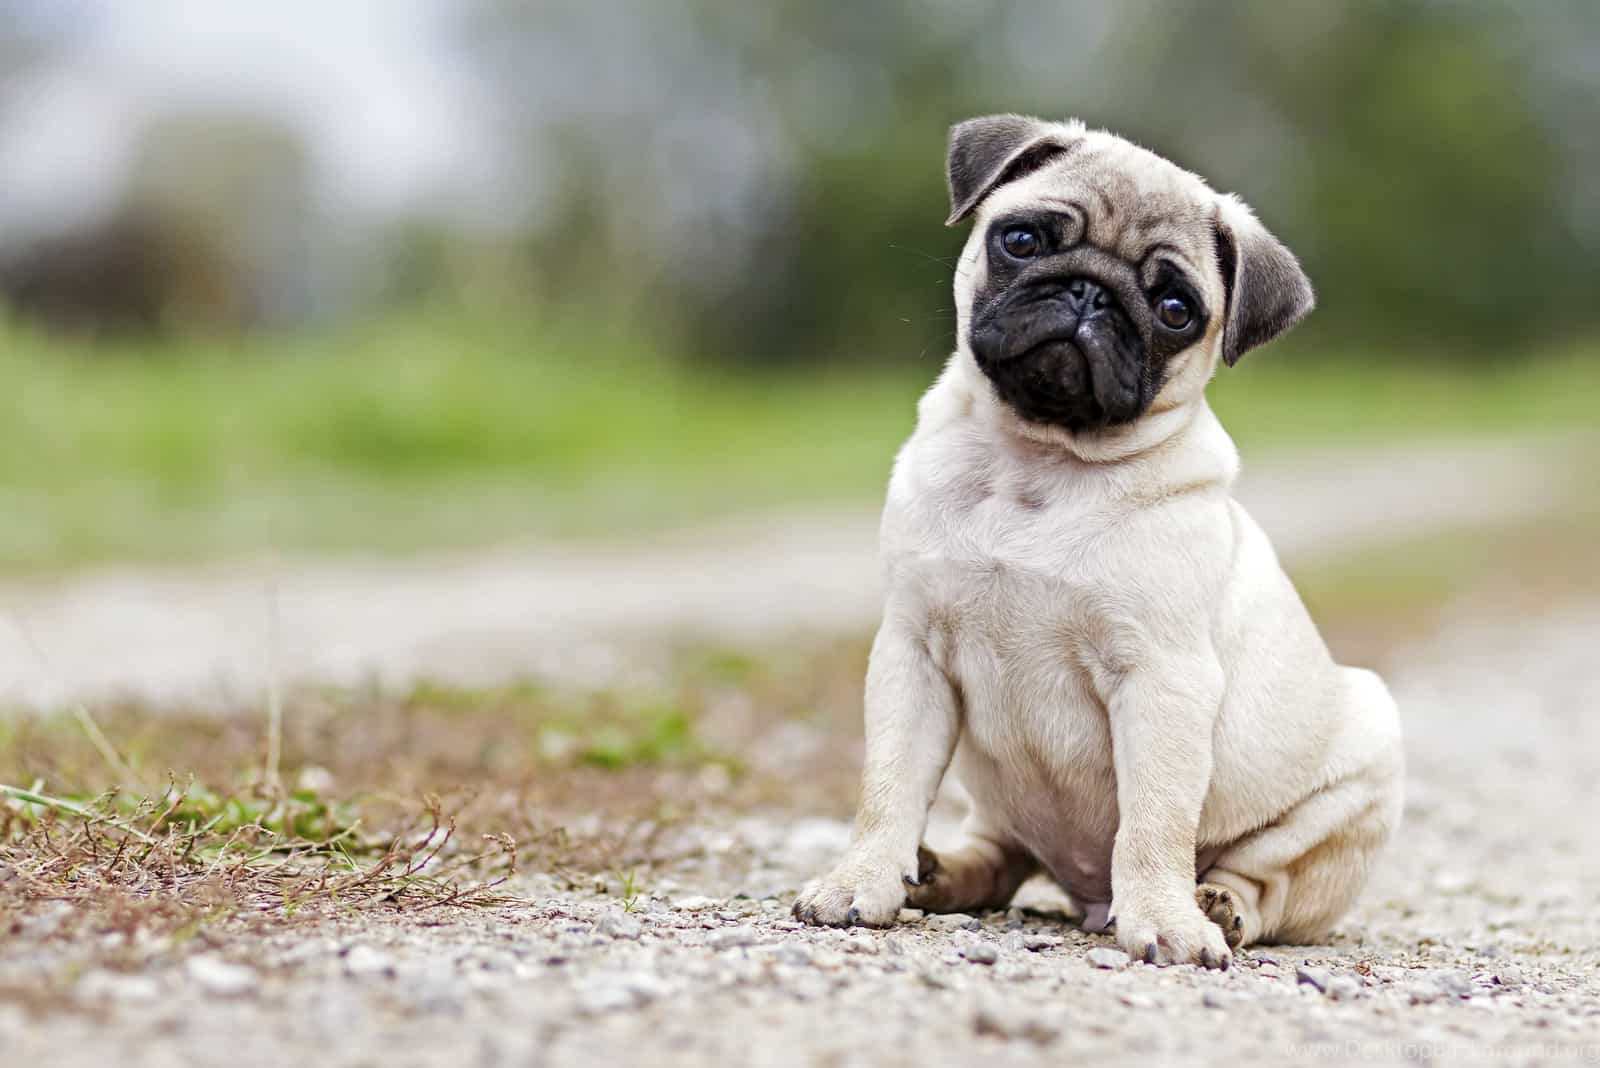 Pug sits and looks at the camera